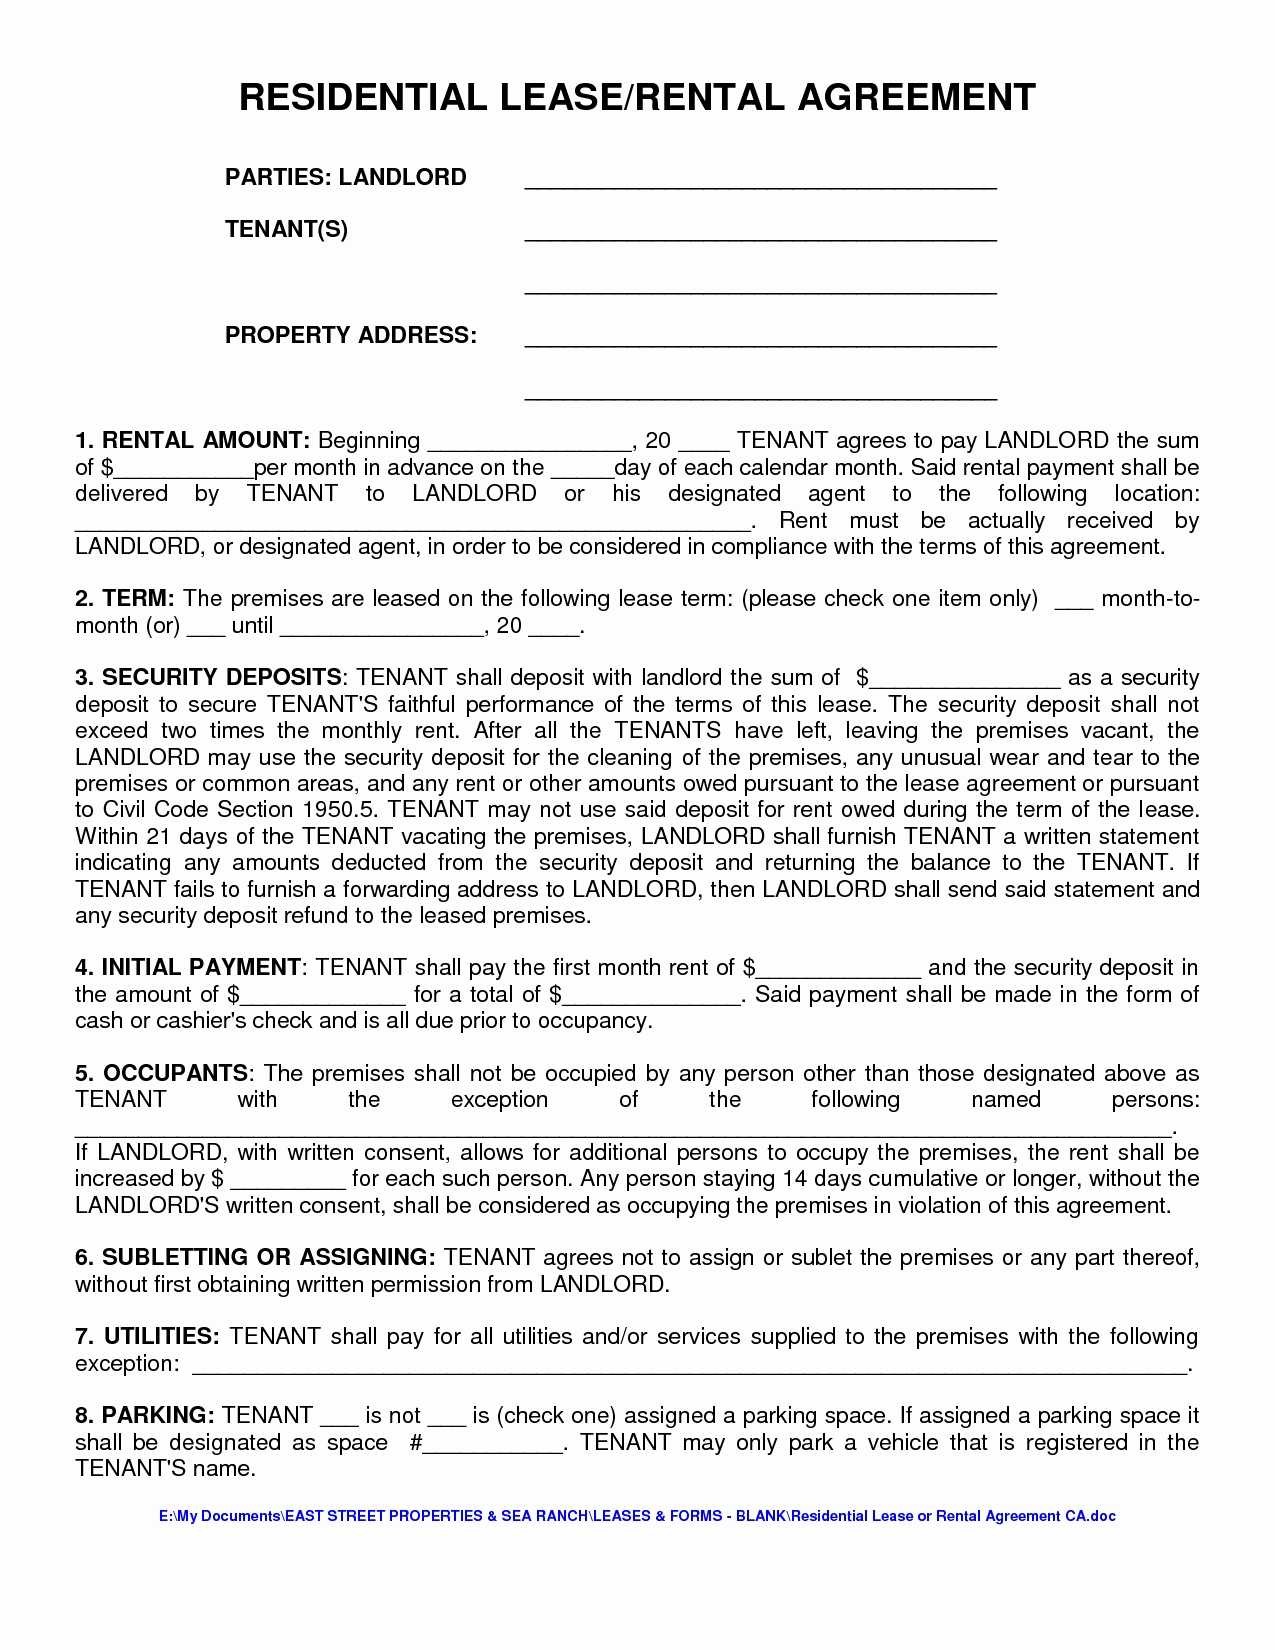 Ca Residential Lease Agreement Lovely 50 Luxury Truck Driver Document Contract